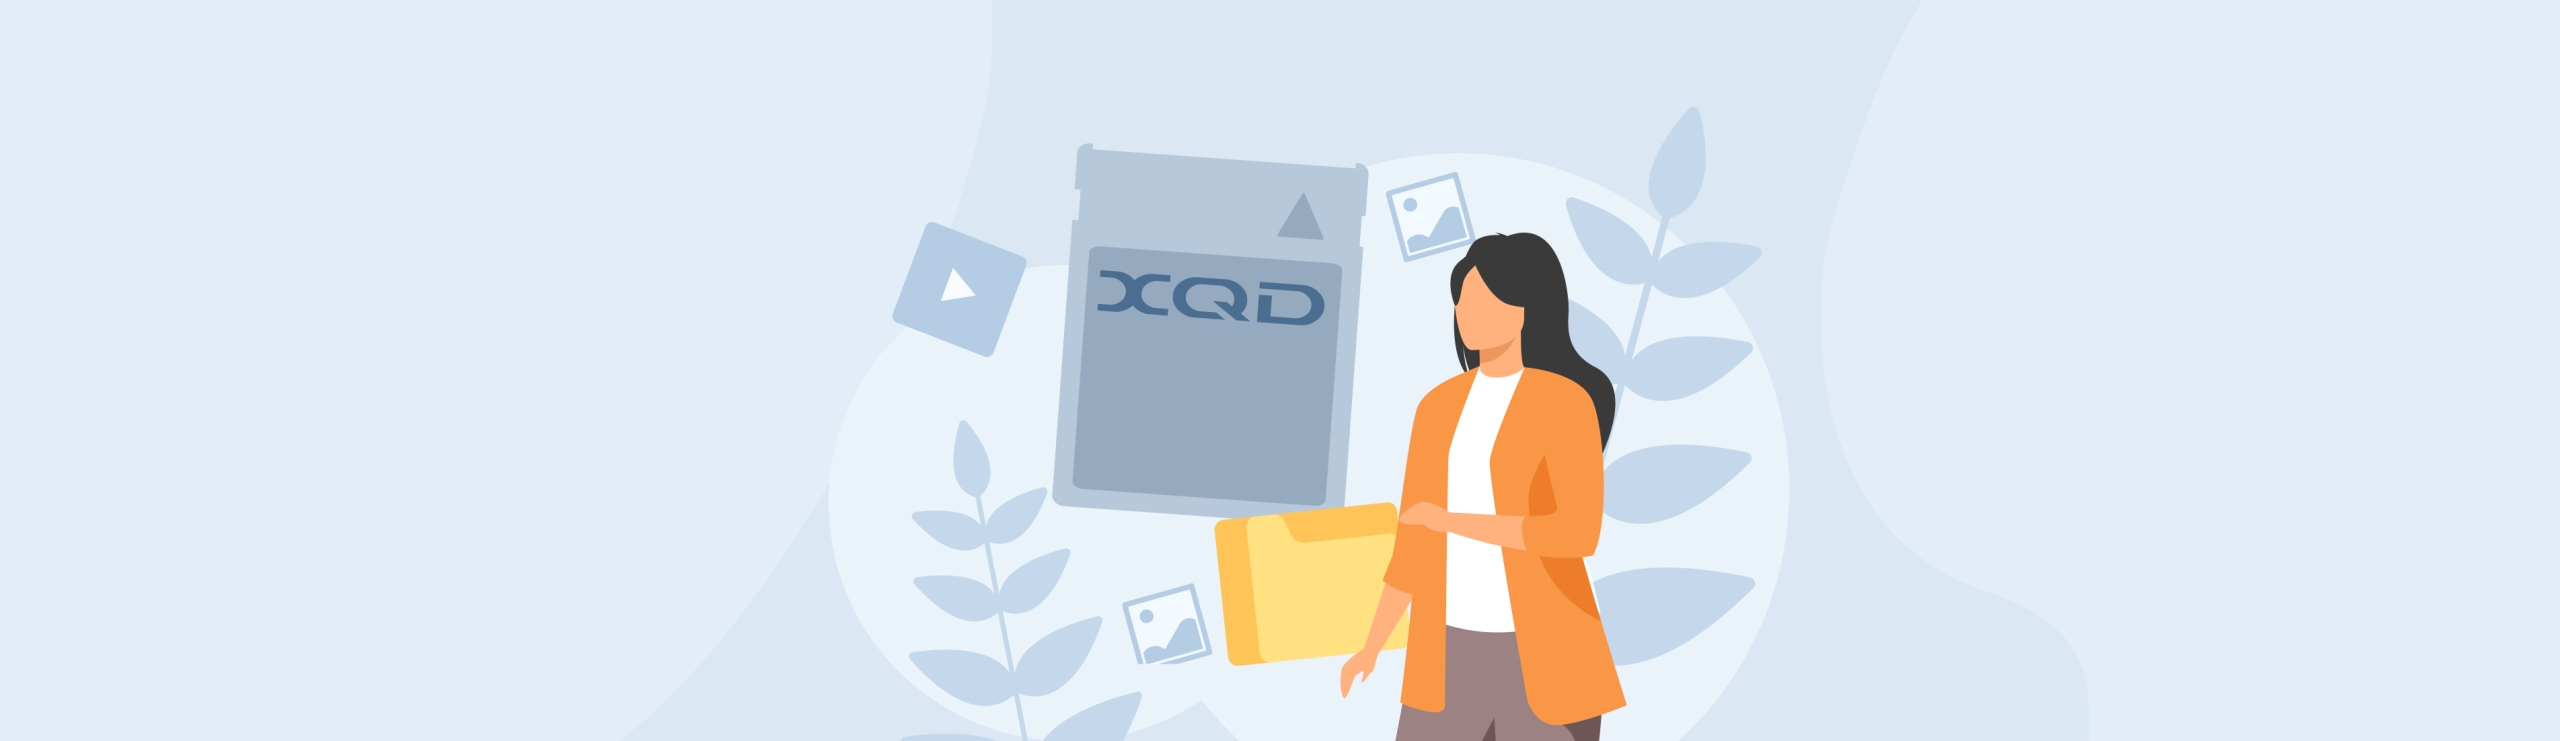 recover data from sony xqd card